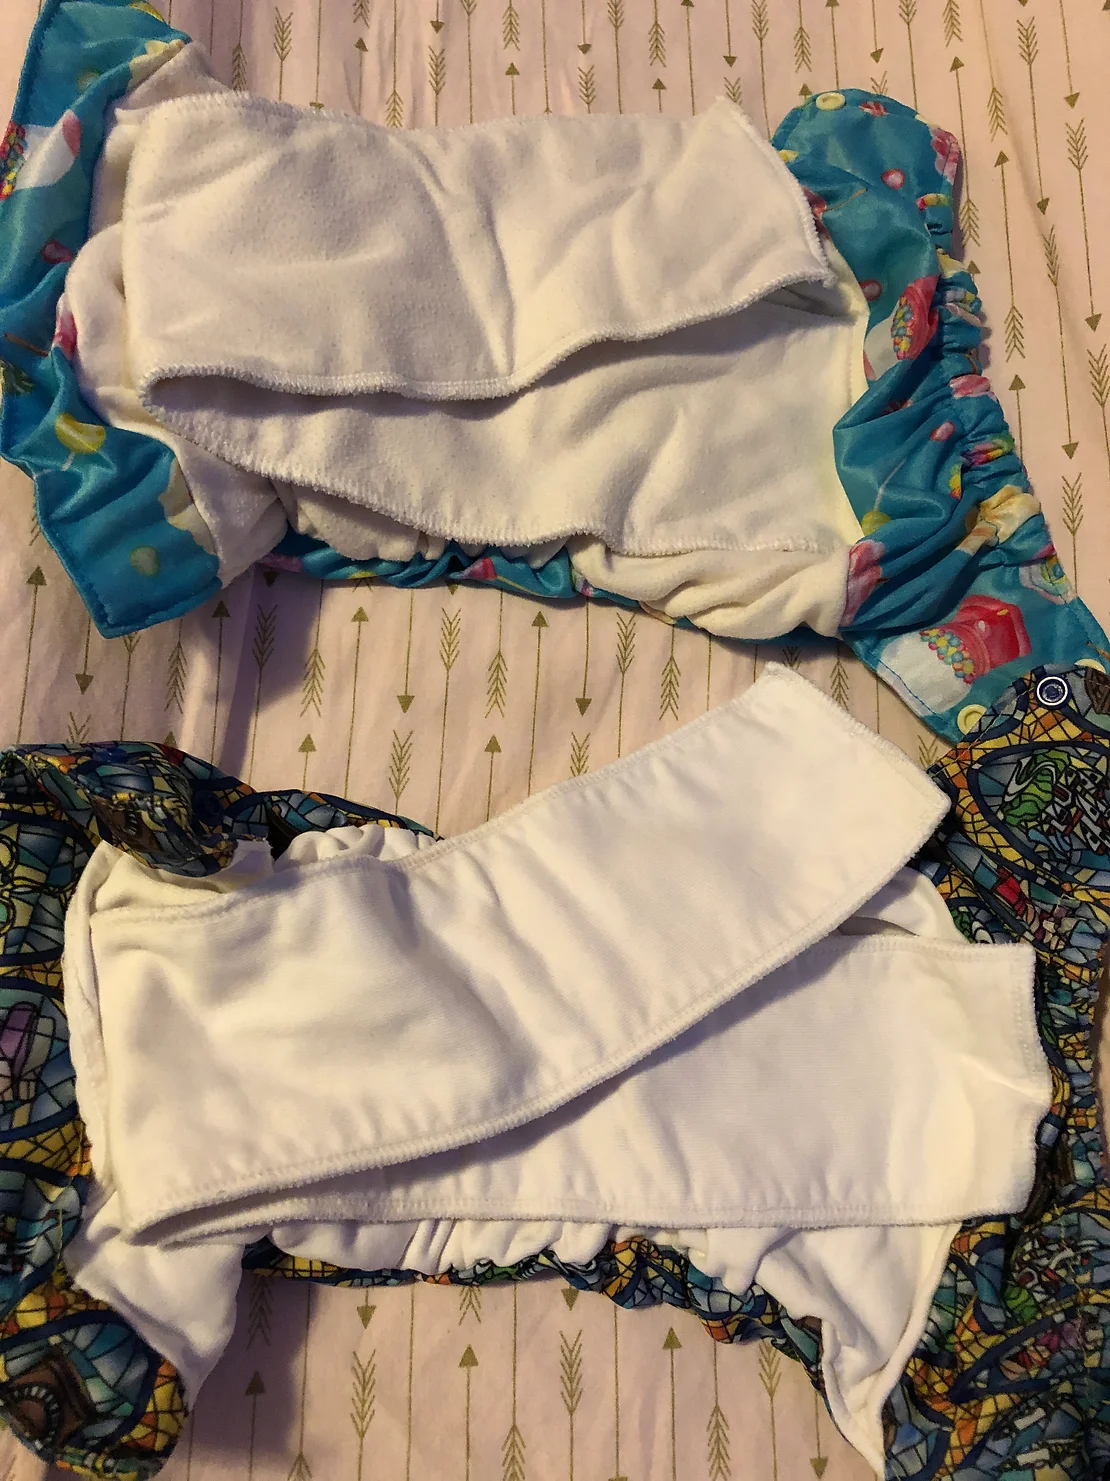 comparing two sizes of cloth diaper